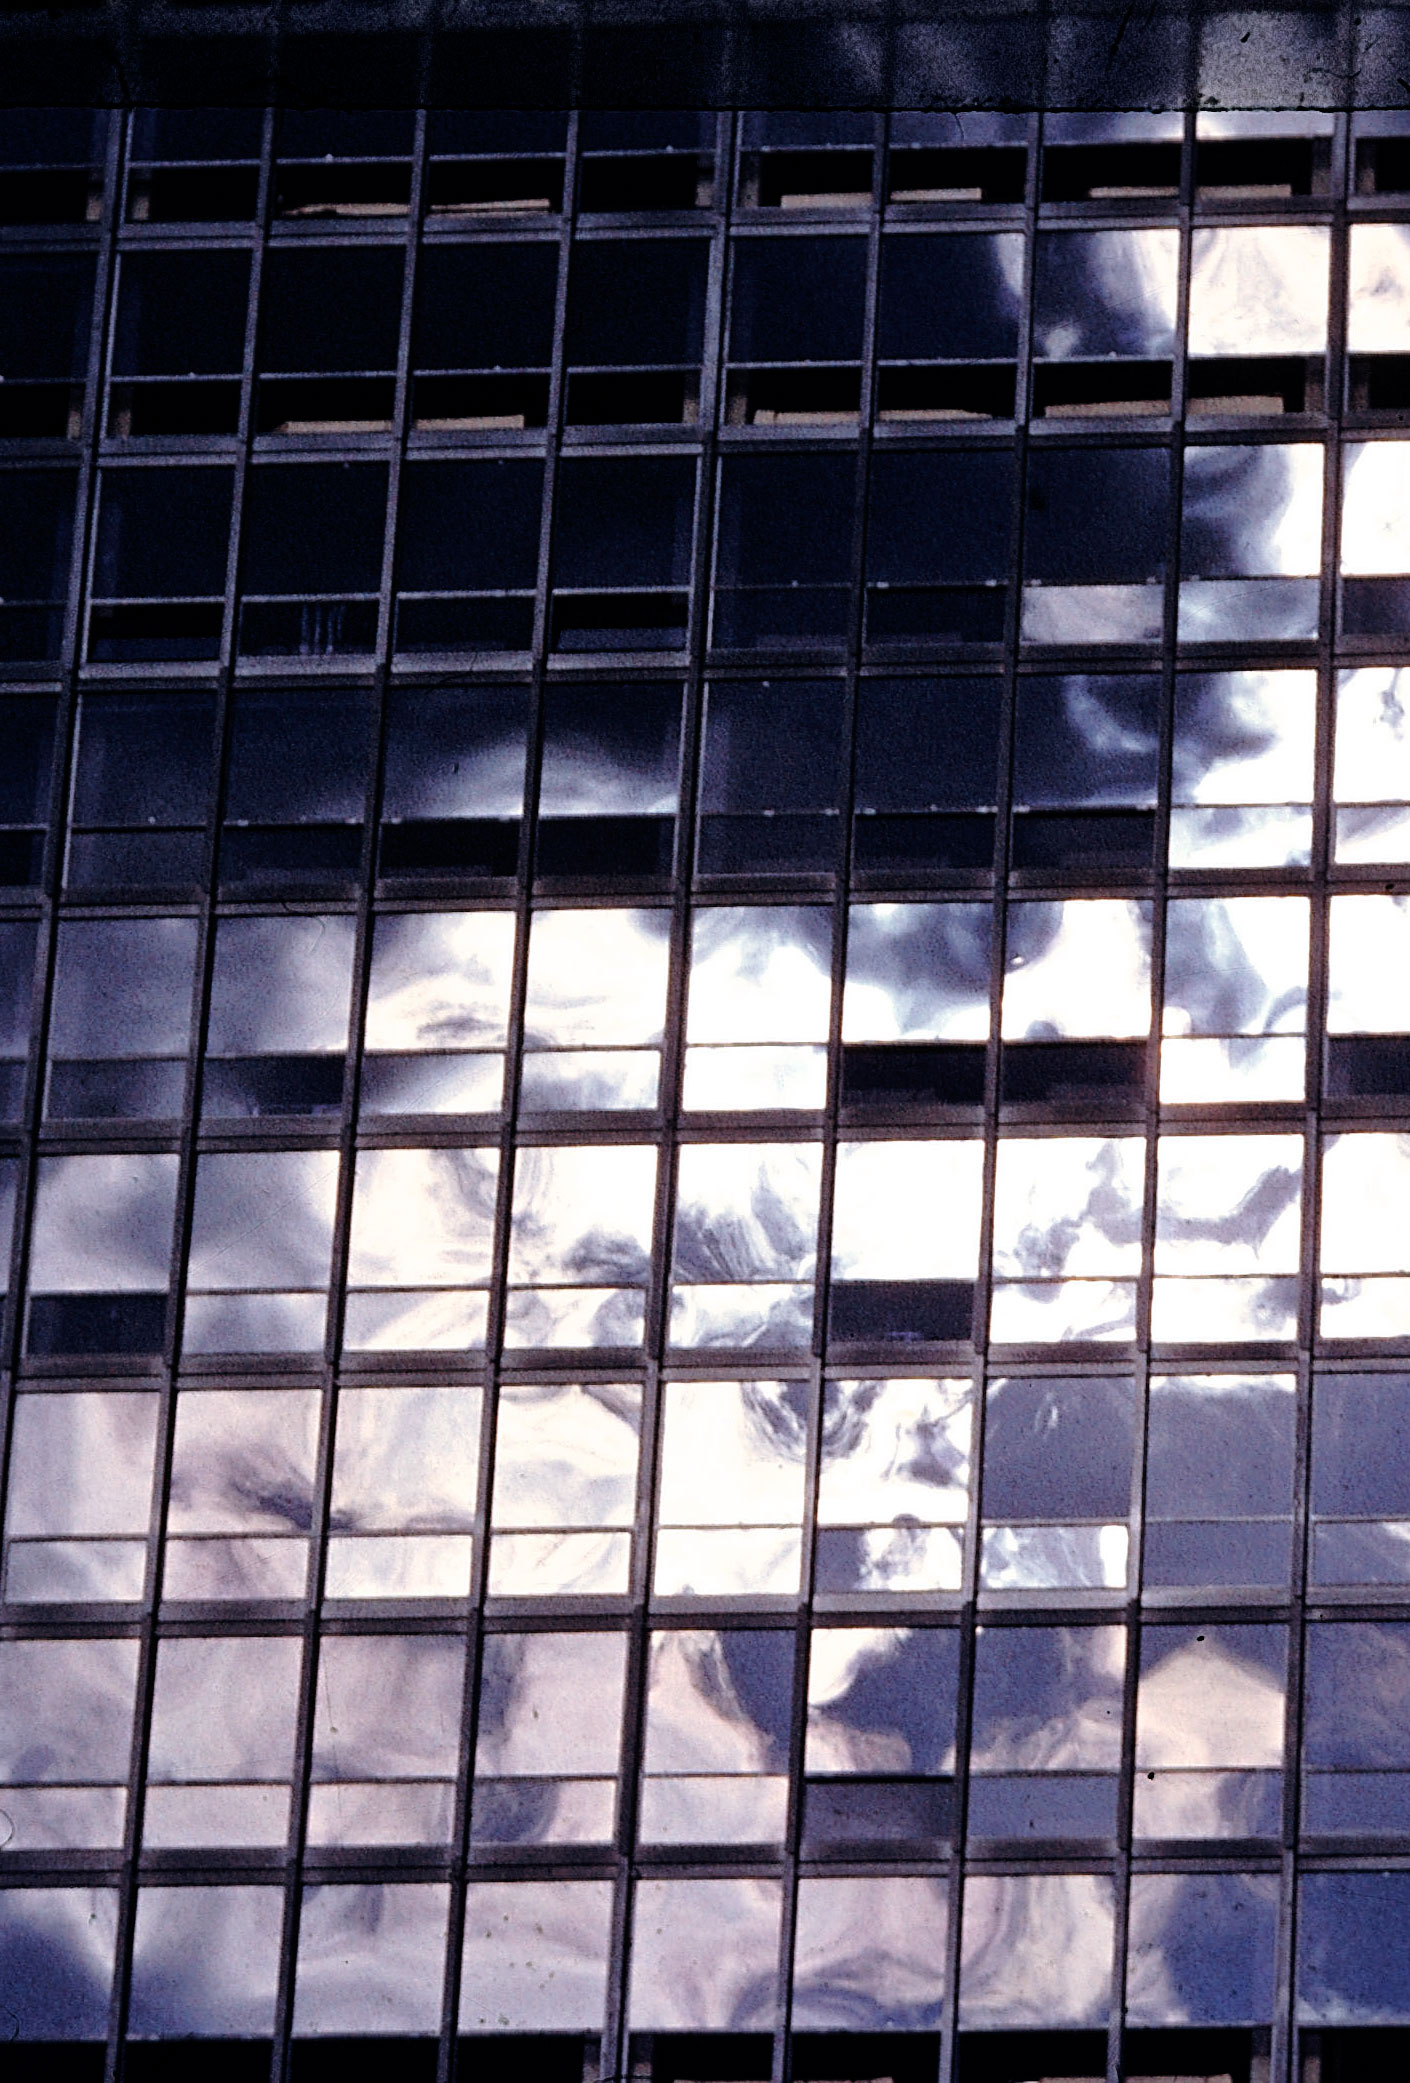 Clouds reflected on the glass facade of an apartment building in Chicago designed by Ludwig Mies van der Rohe, 1956.